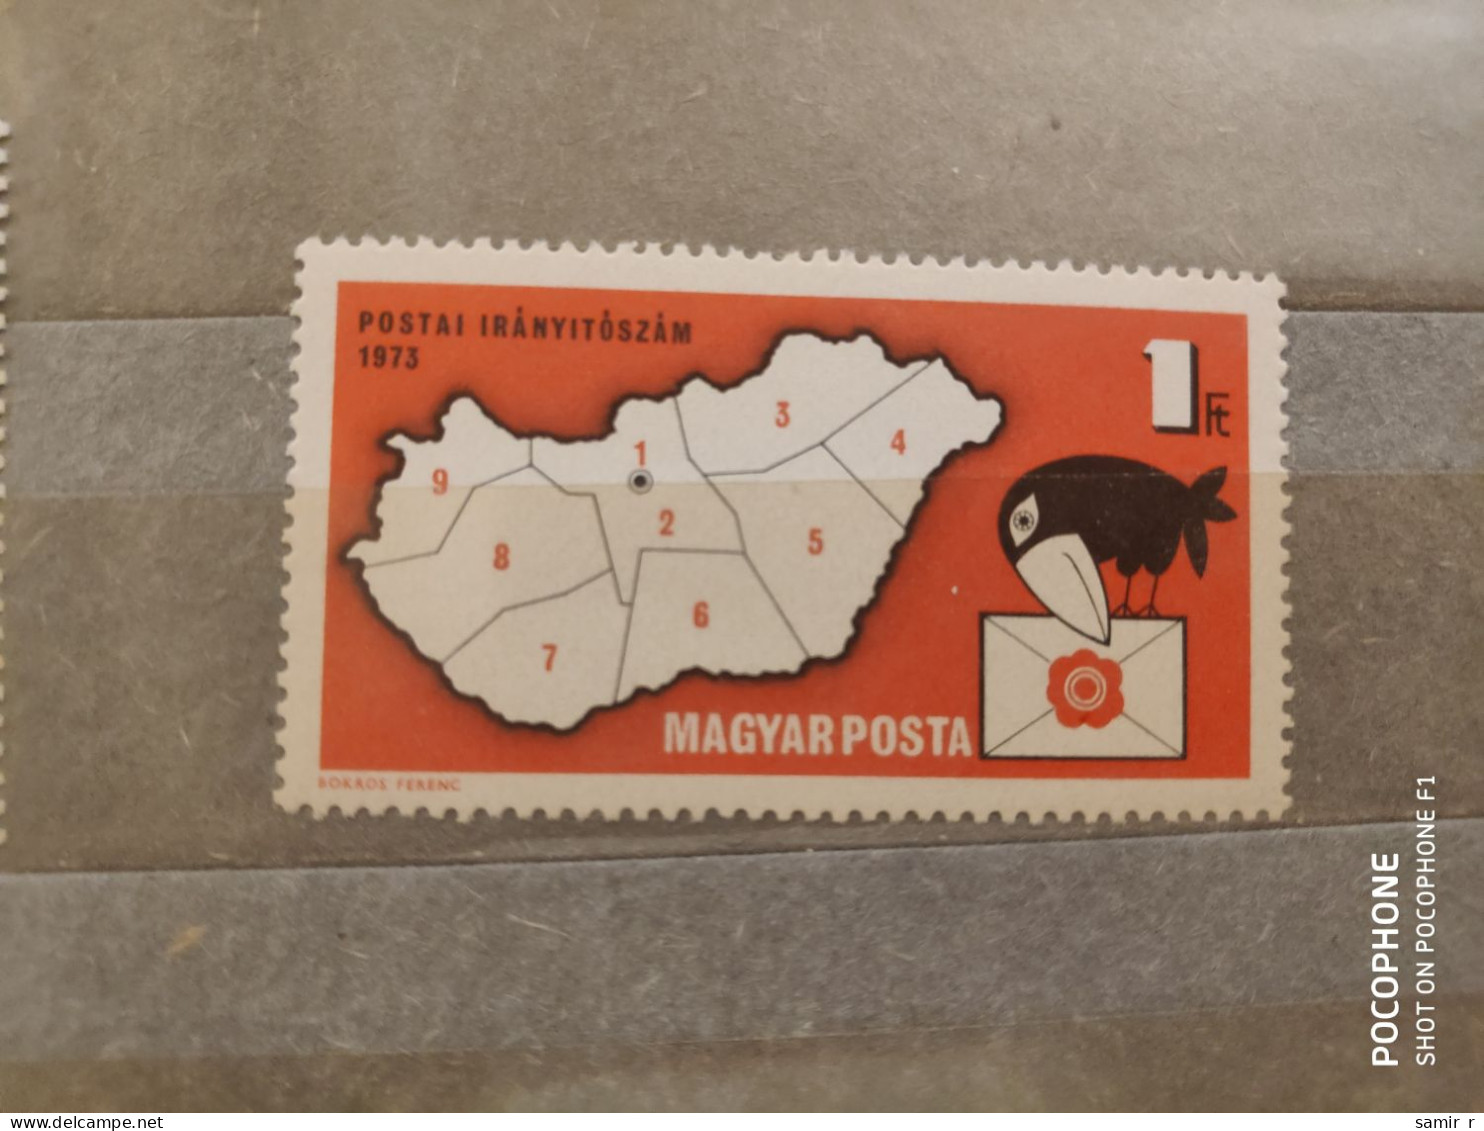 1973	Hungary	Postal Code System (F91) - Unused Stamps